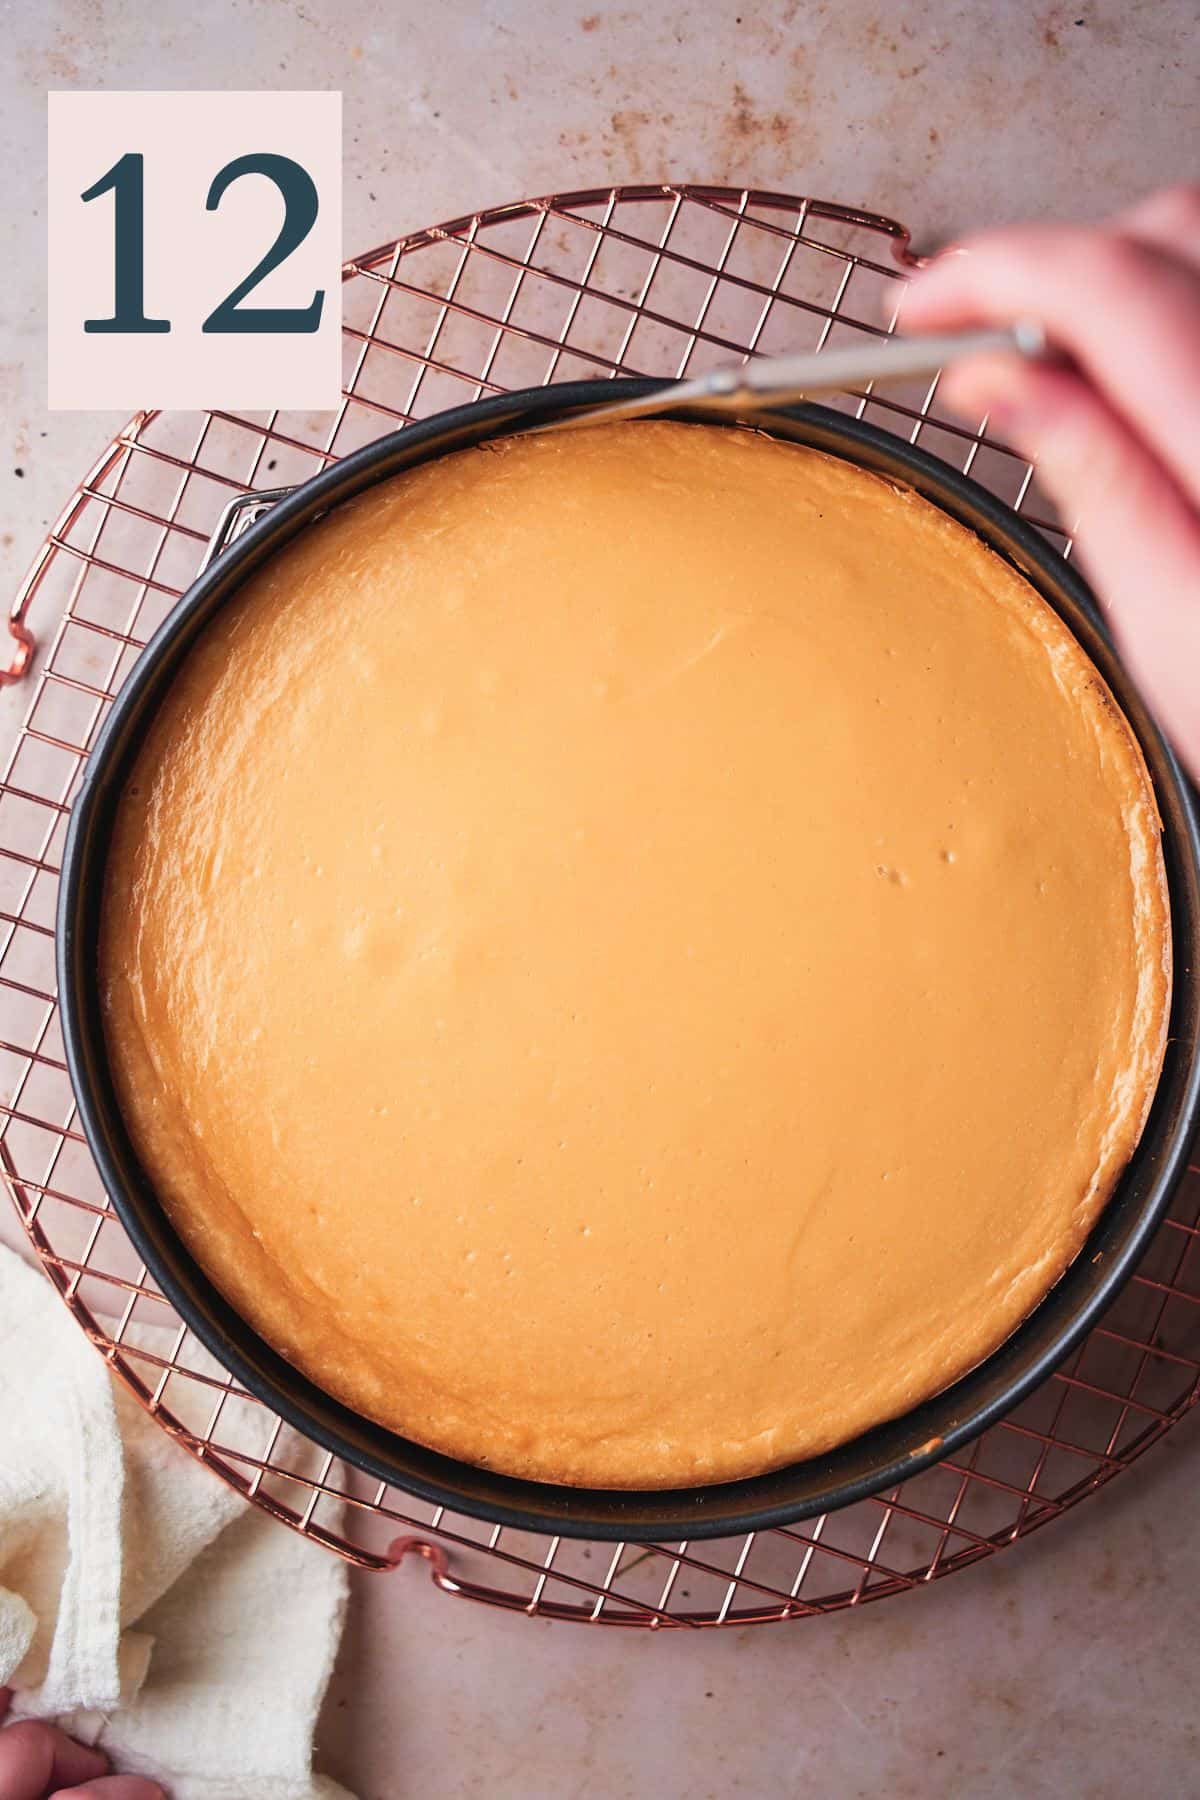 hand taking a butter knife and running it along the edge of a springform pan with a caramel cheesecake inside.